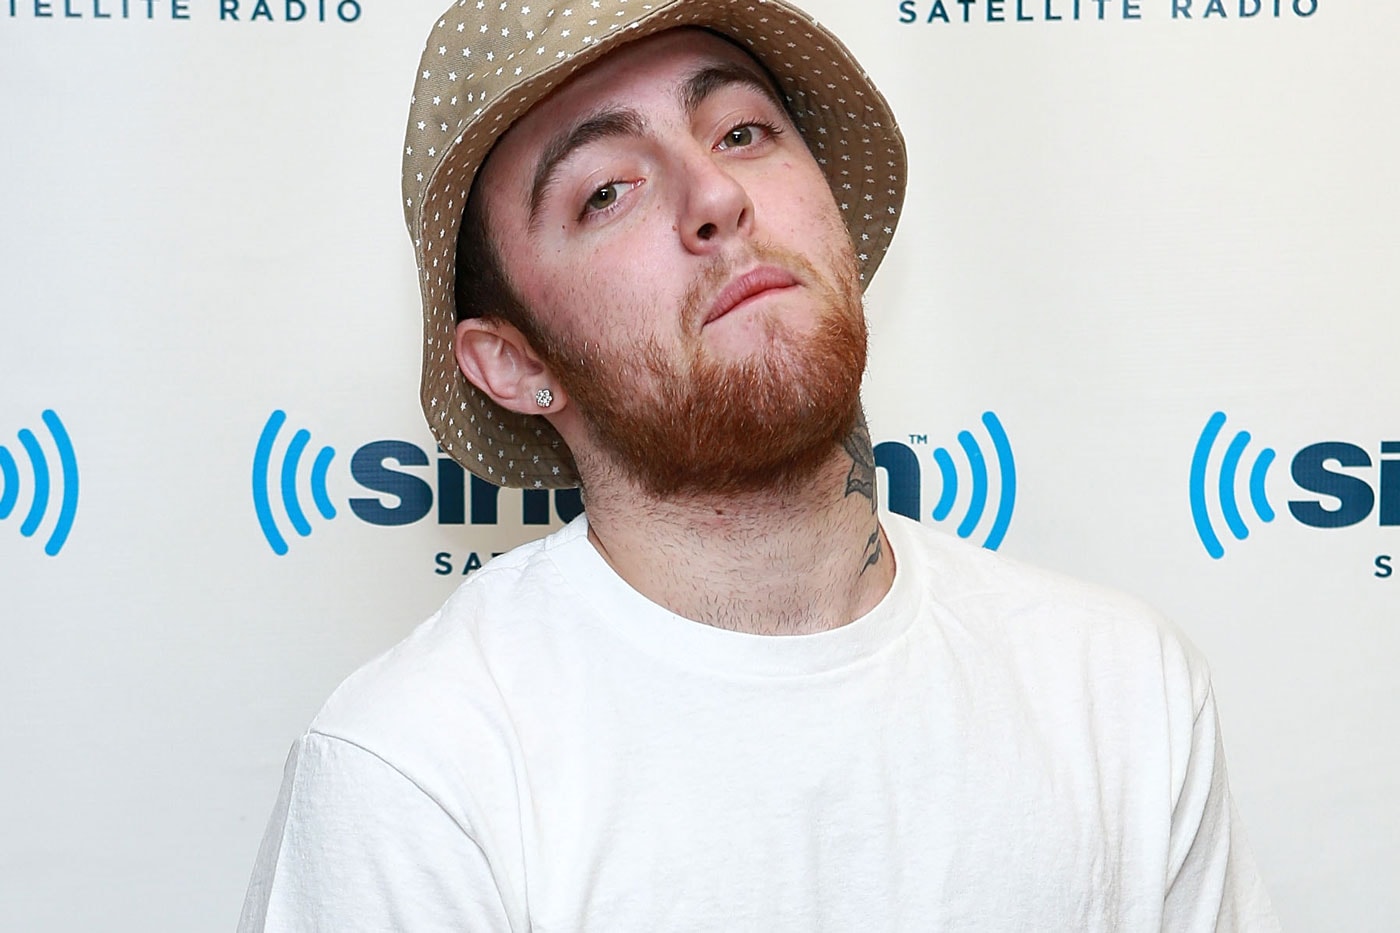 Mac Miller Pays Homage to Billy Joel With His Latest Song